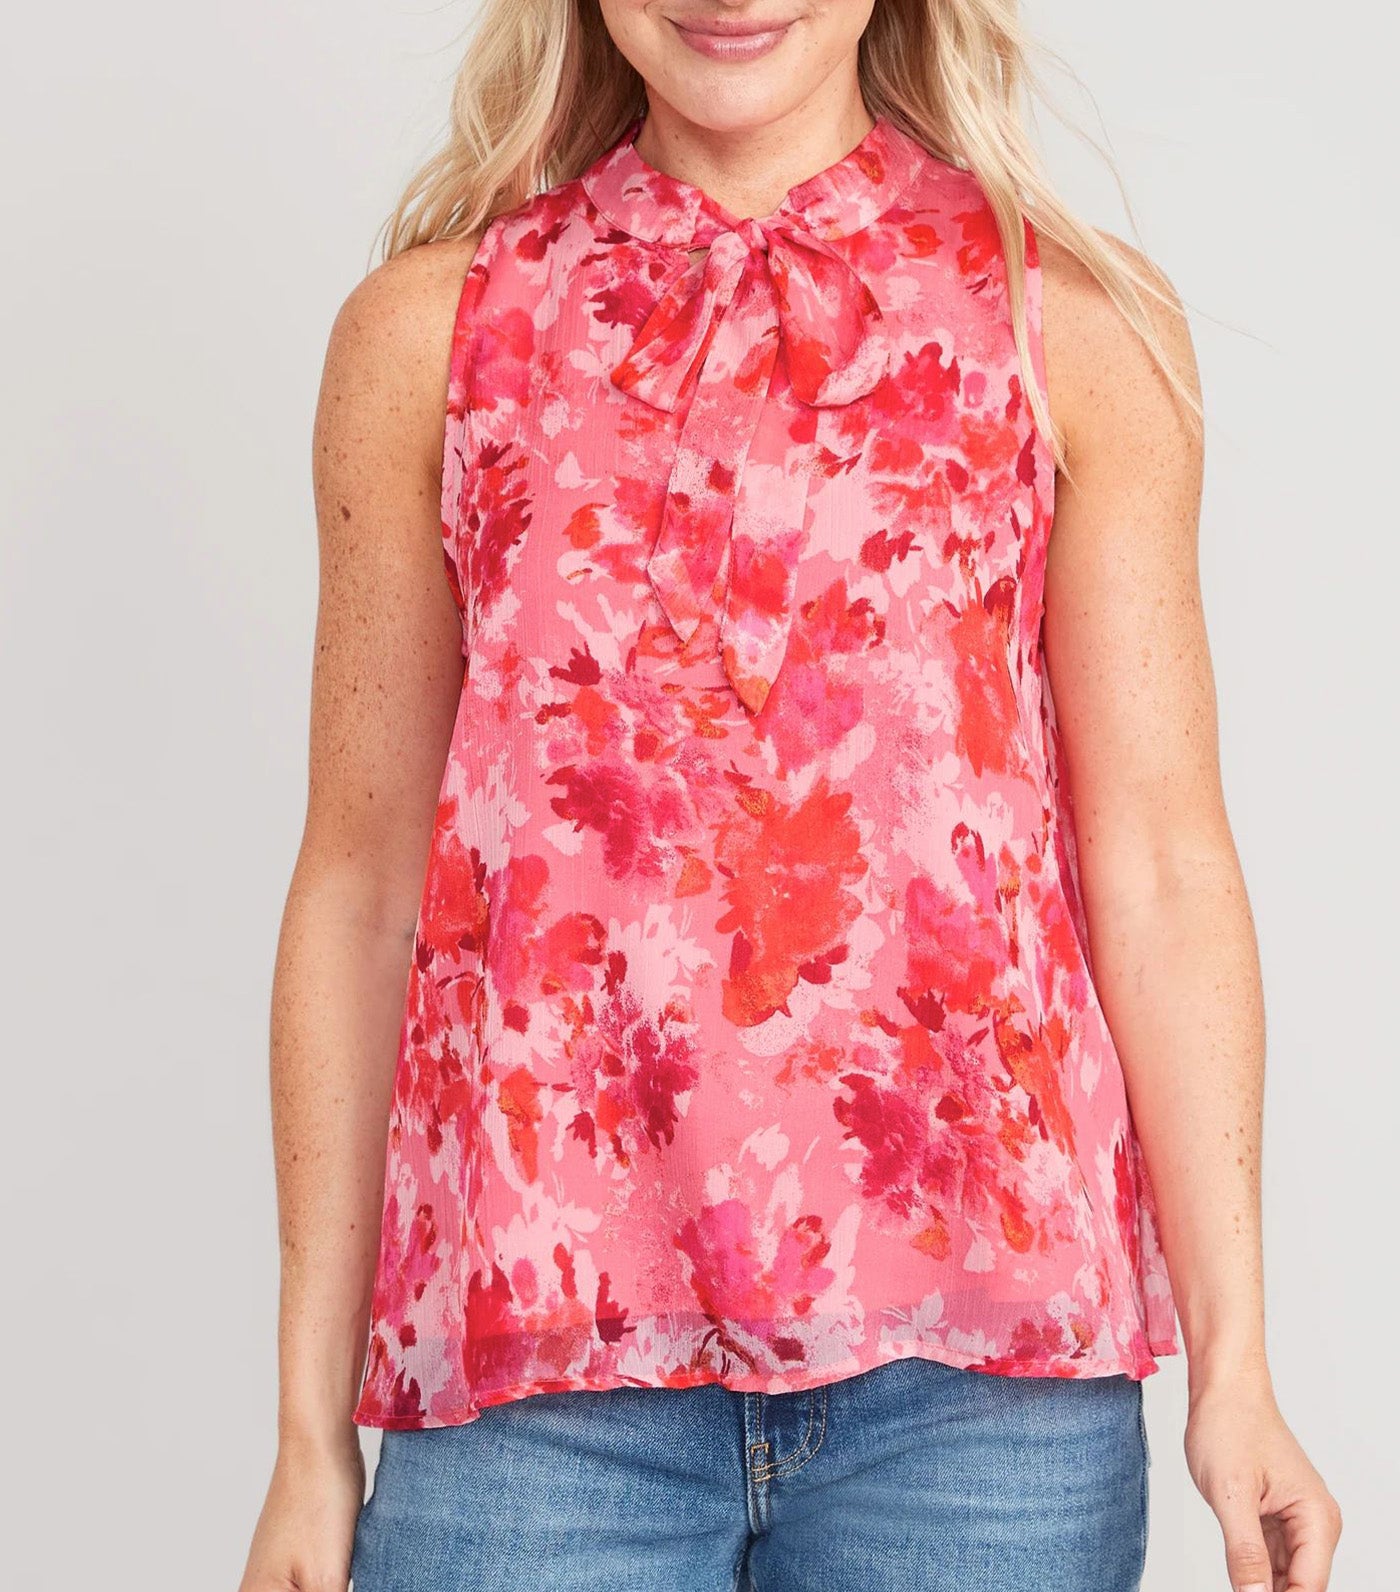 High Neck Bow-Front Chiffon Top for Women Pink Floral